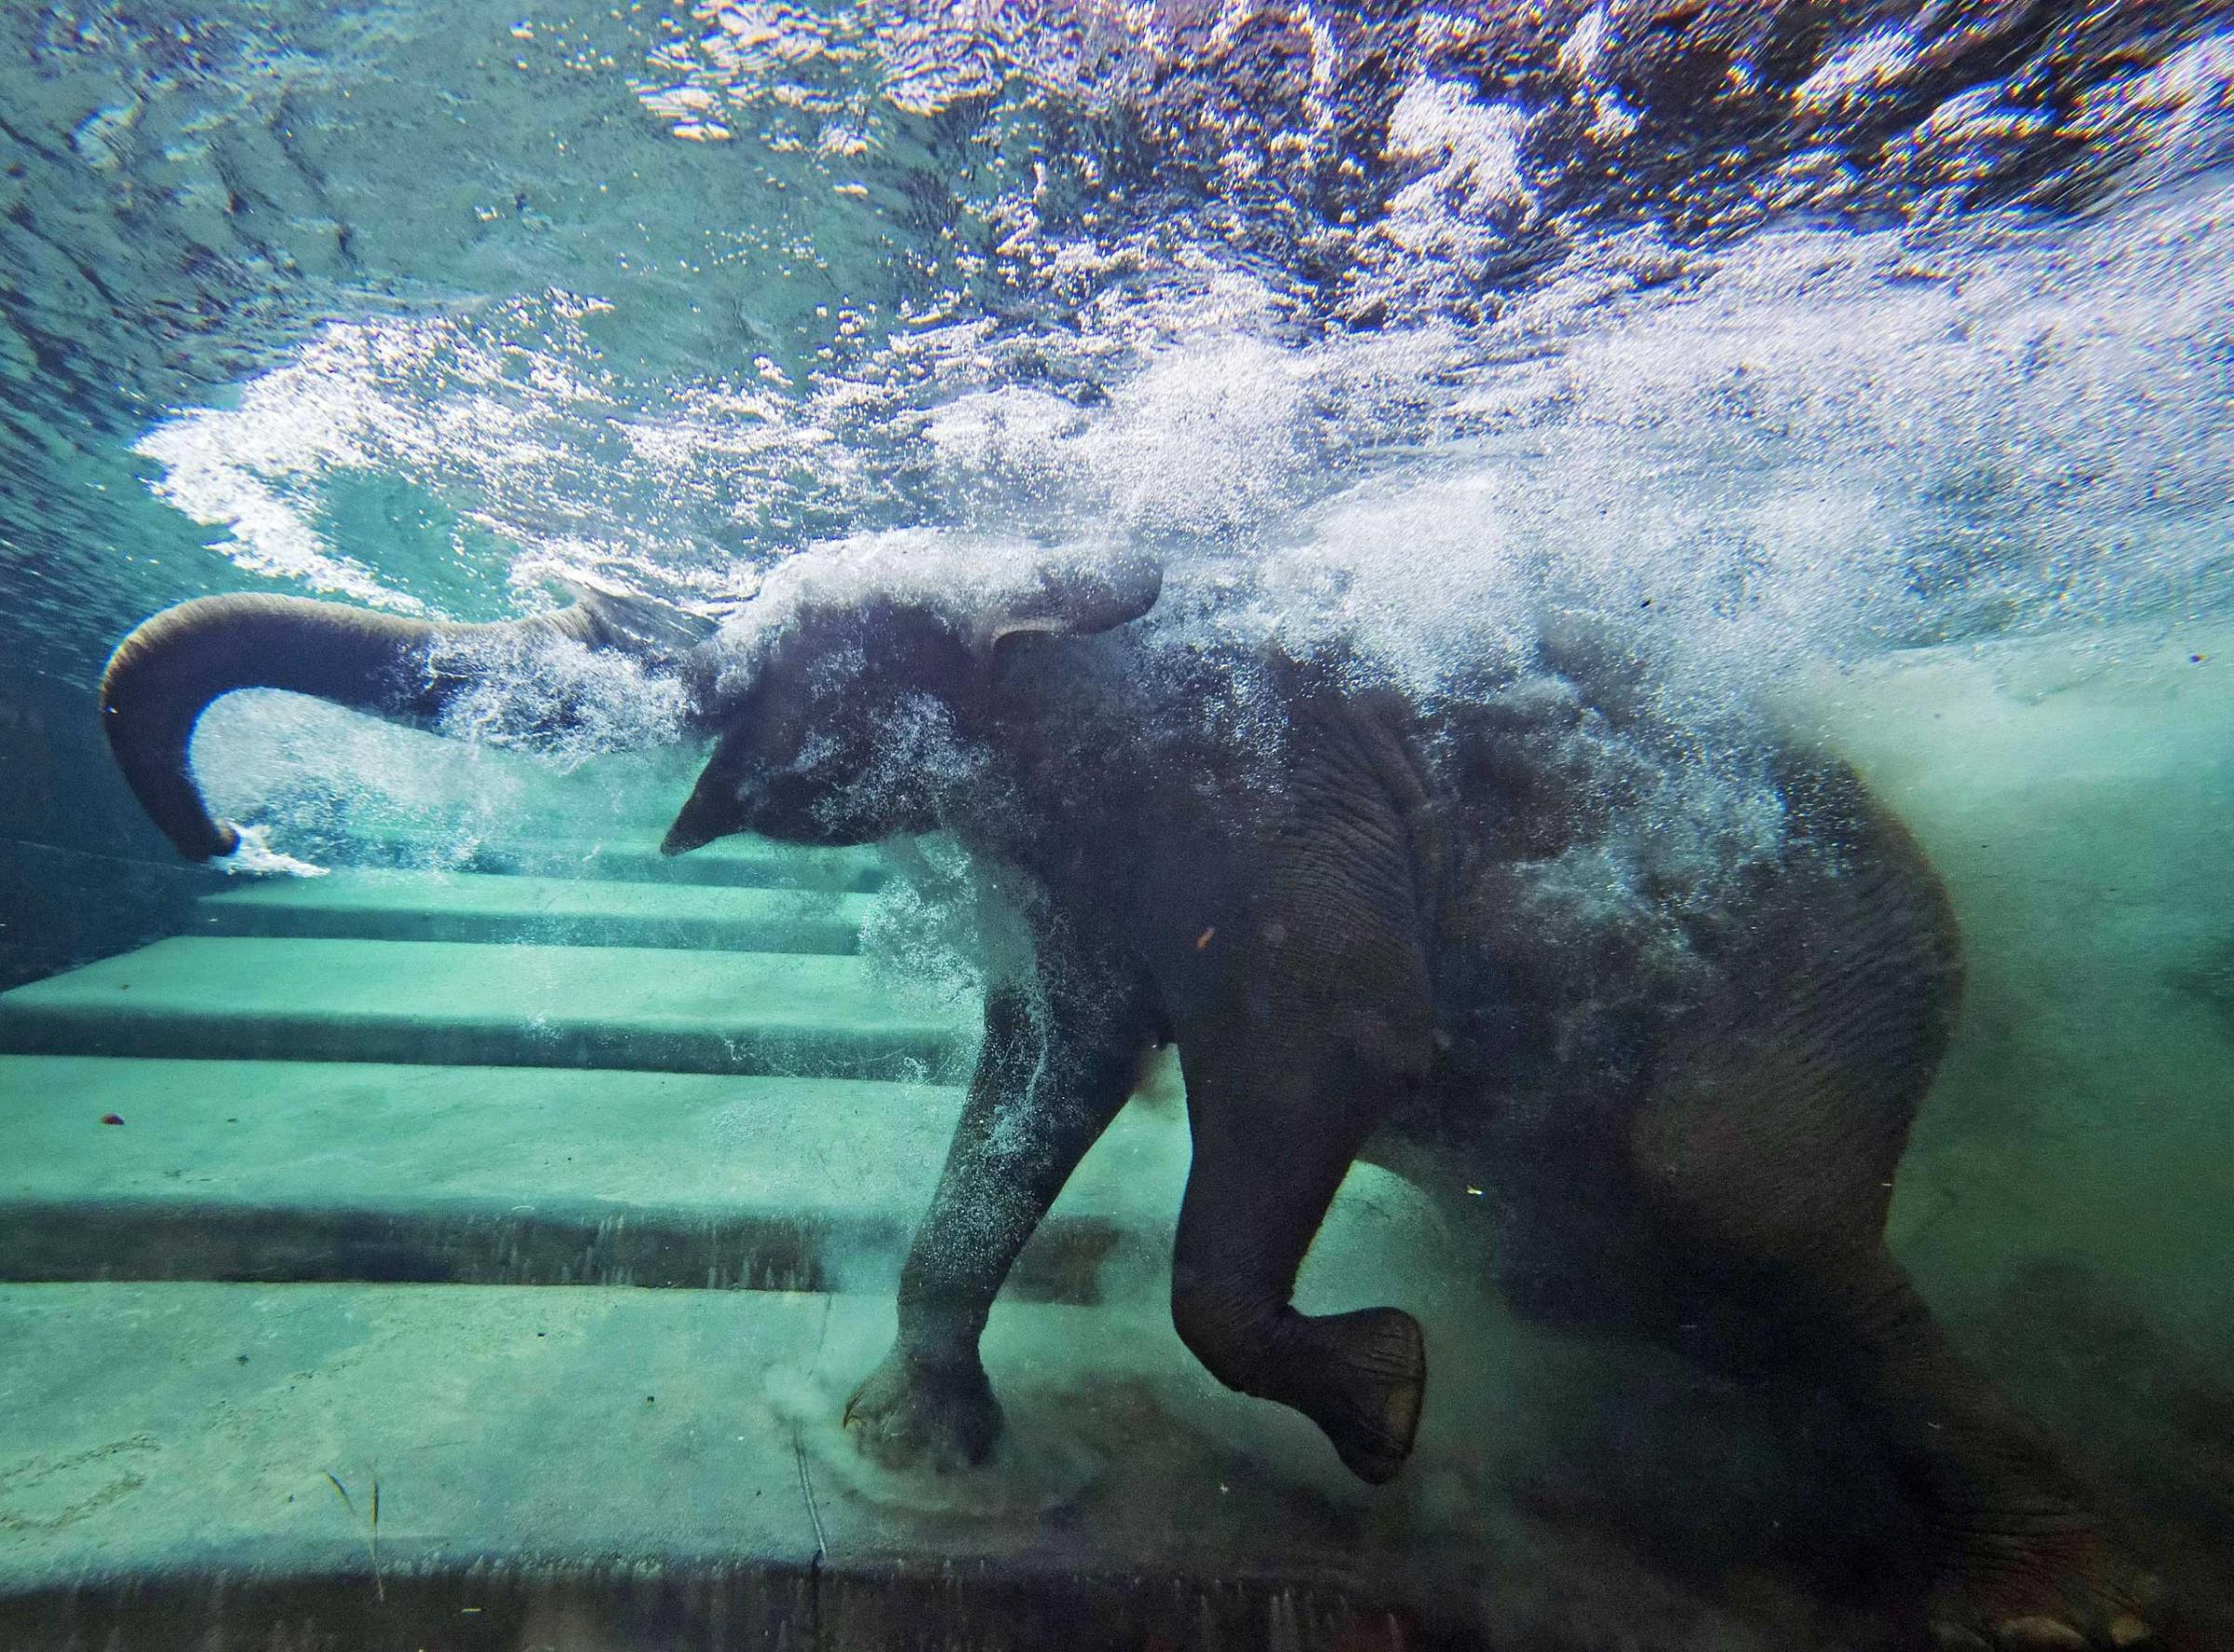 An elephant immerses behind a window in the elephants' indoor pool at the Zoo in Leipzig, Germany, Aug. 5, 2014.